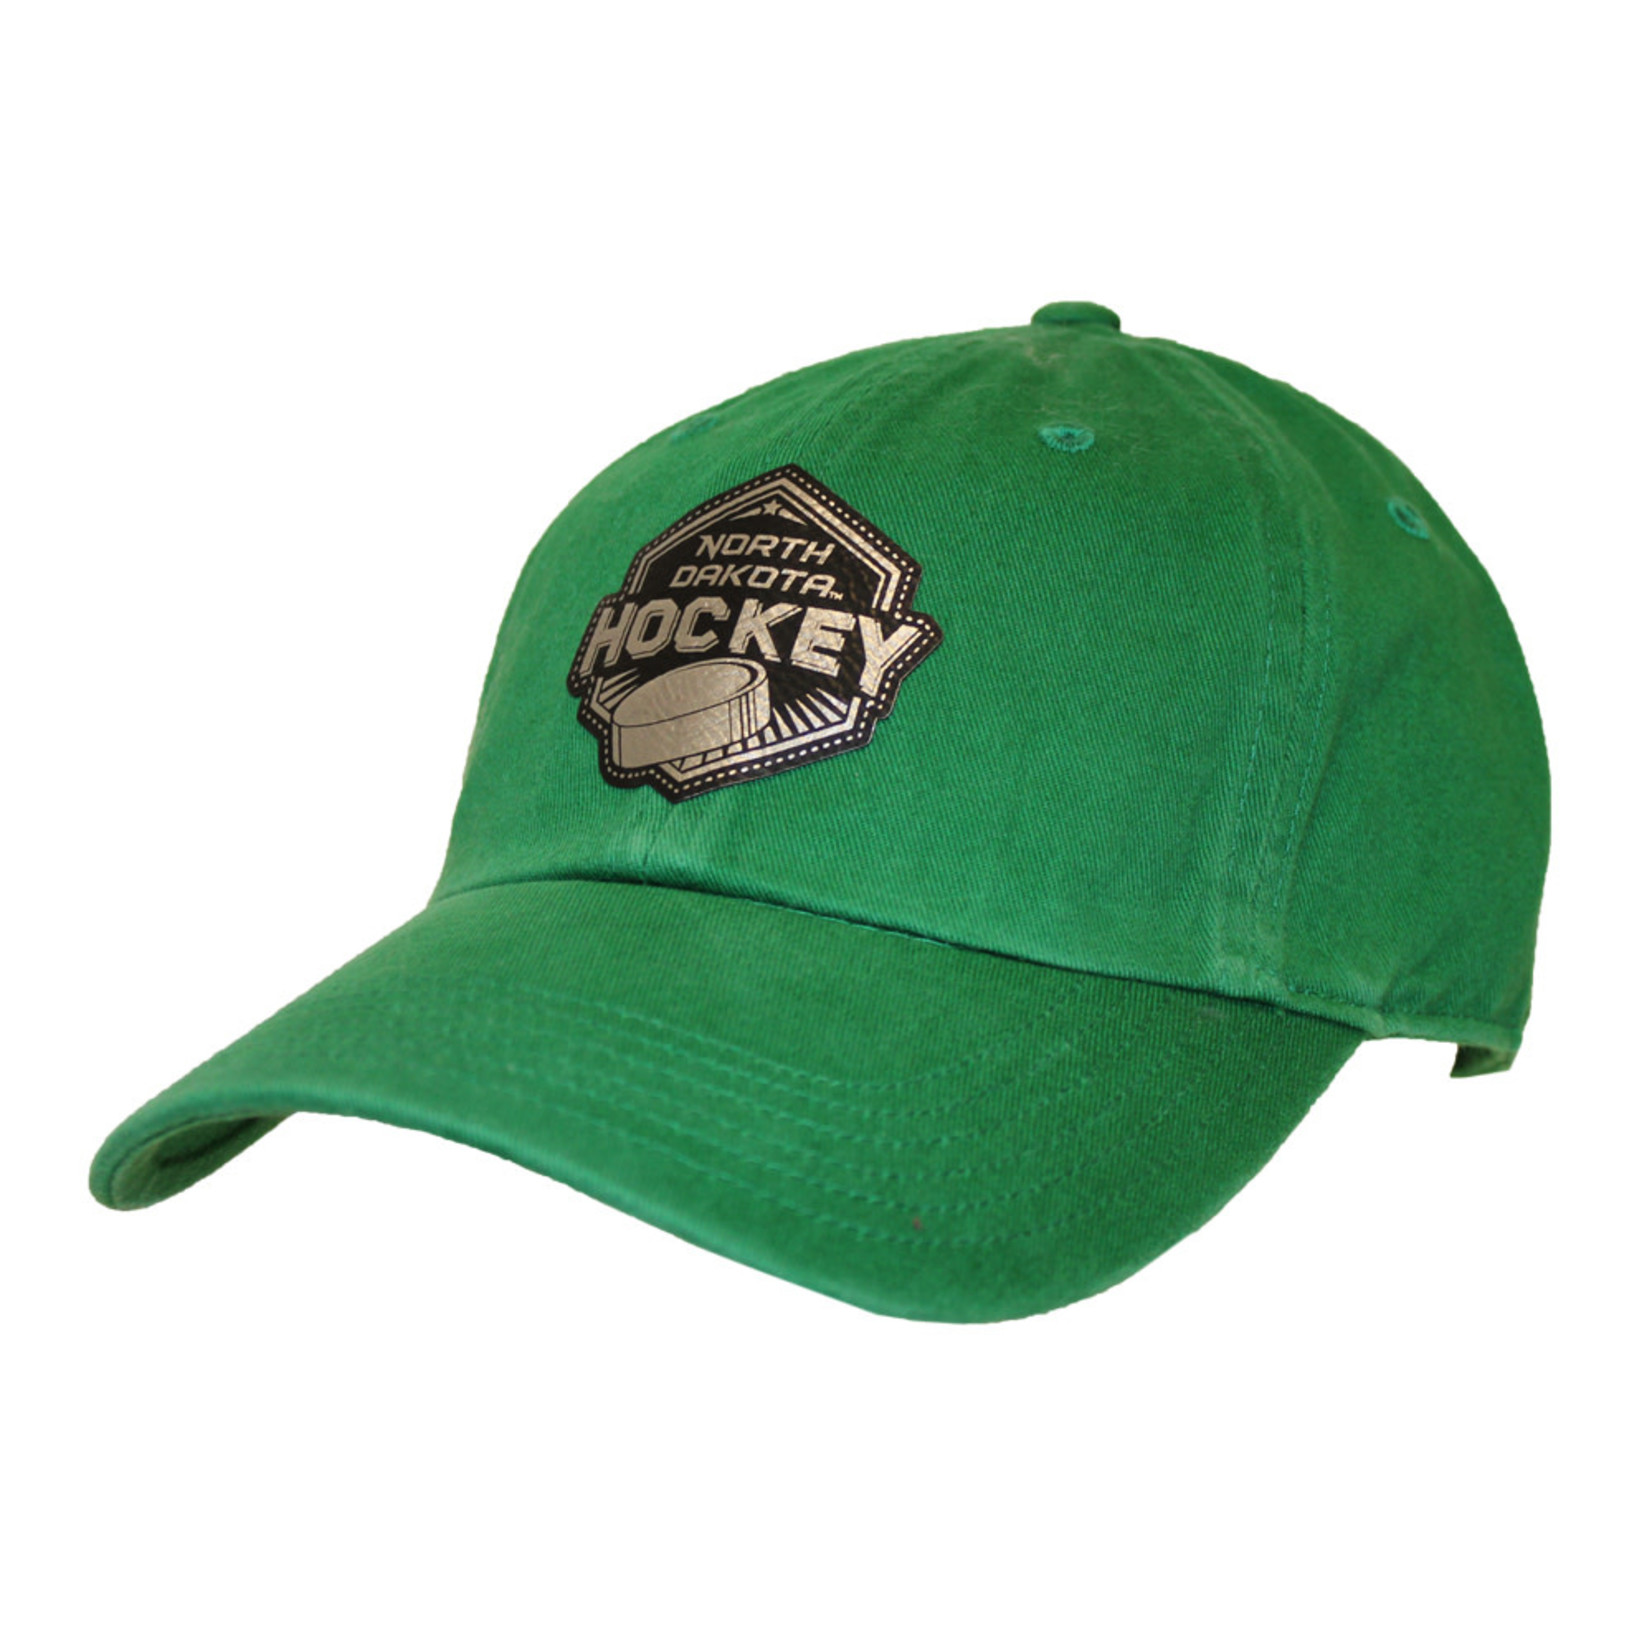 ND Hockey Mitts Leather Patch Kelly Slouch Cap - Sioux Shop at Ralph ...